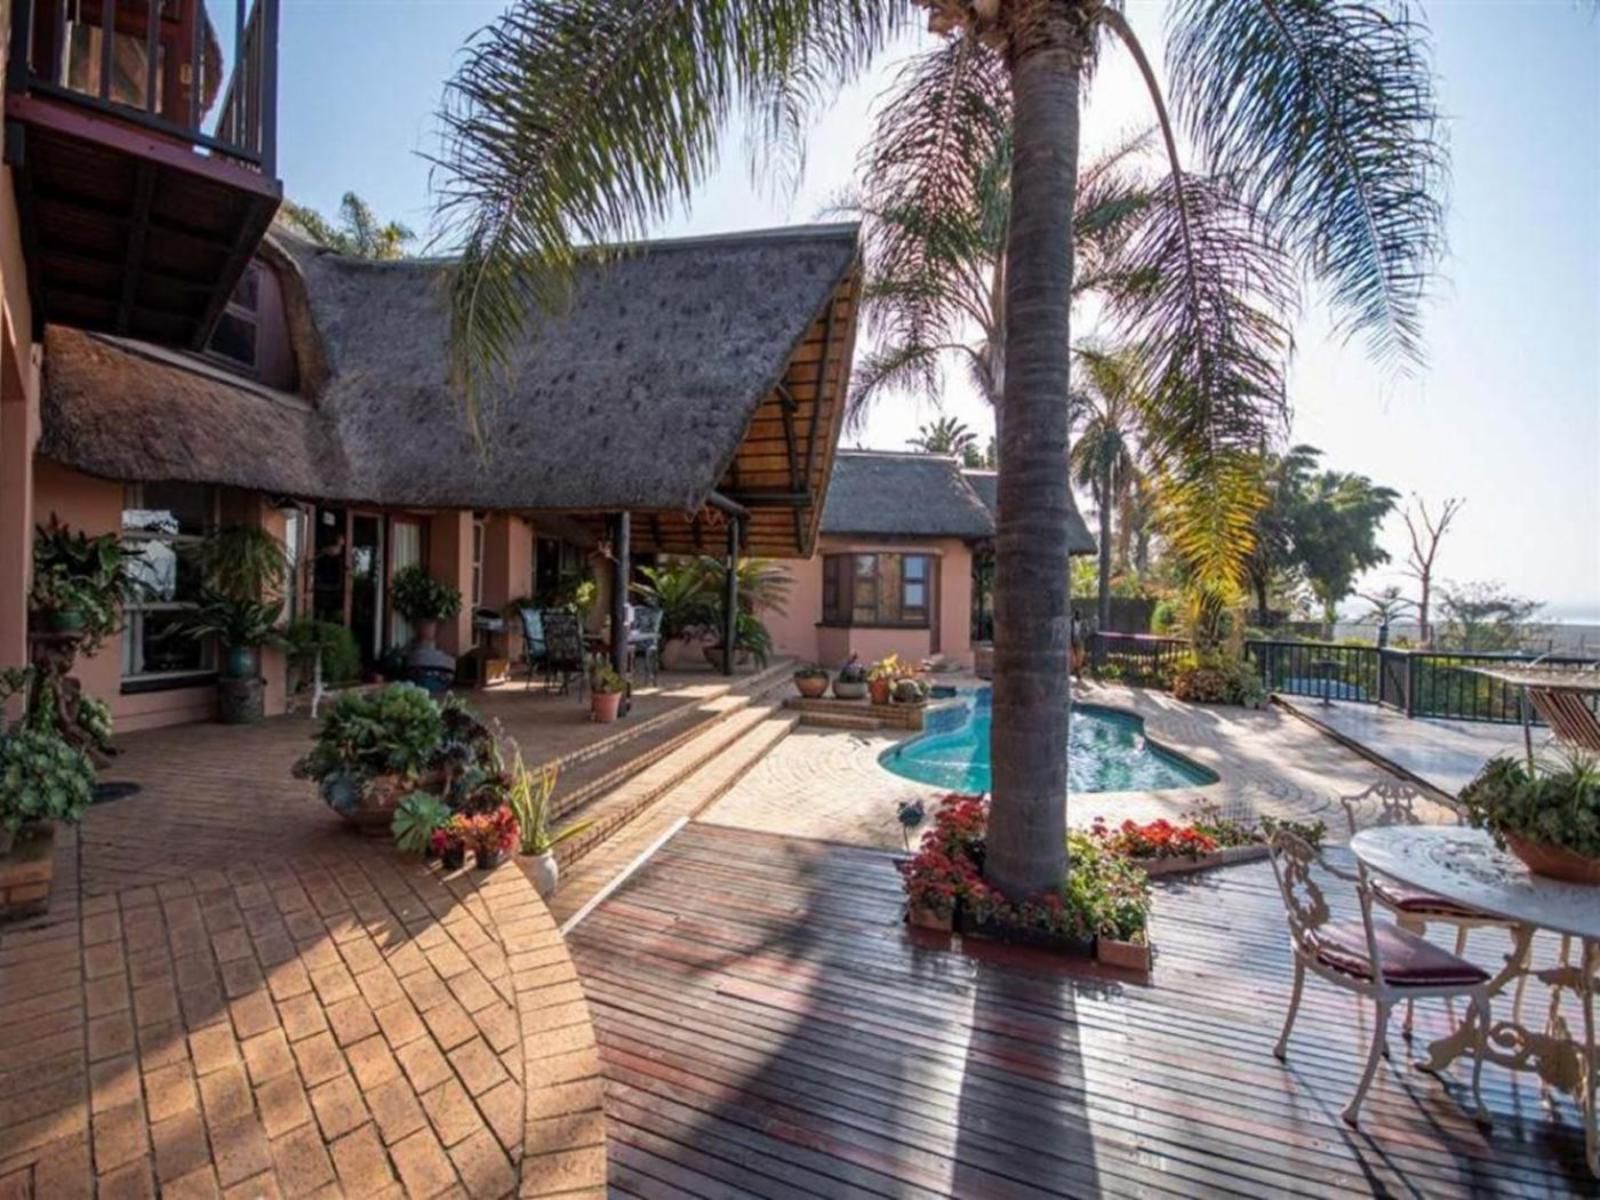 Marina Views Guesthouse Kosmos Hartbeespoort North West Province South Africa House, Building, Architecture, Palm Tree, Plant, Nature, Wood, Swimming Pool